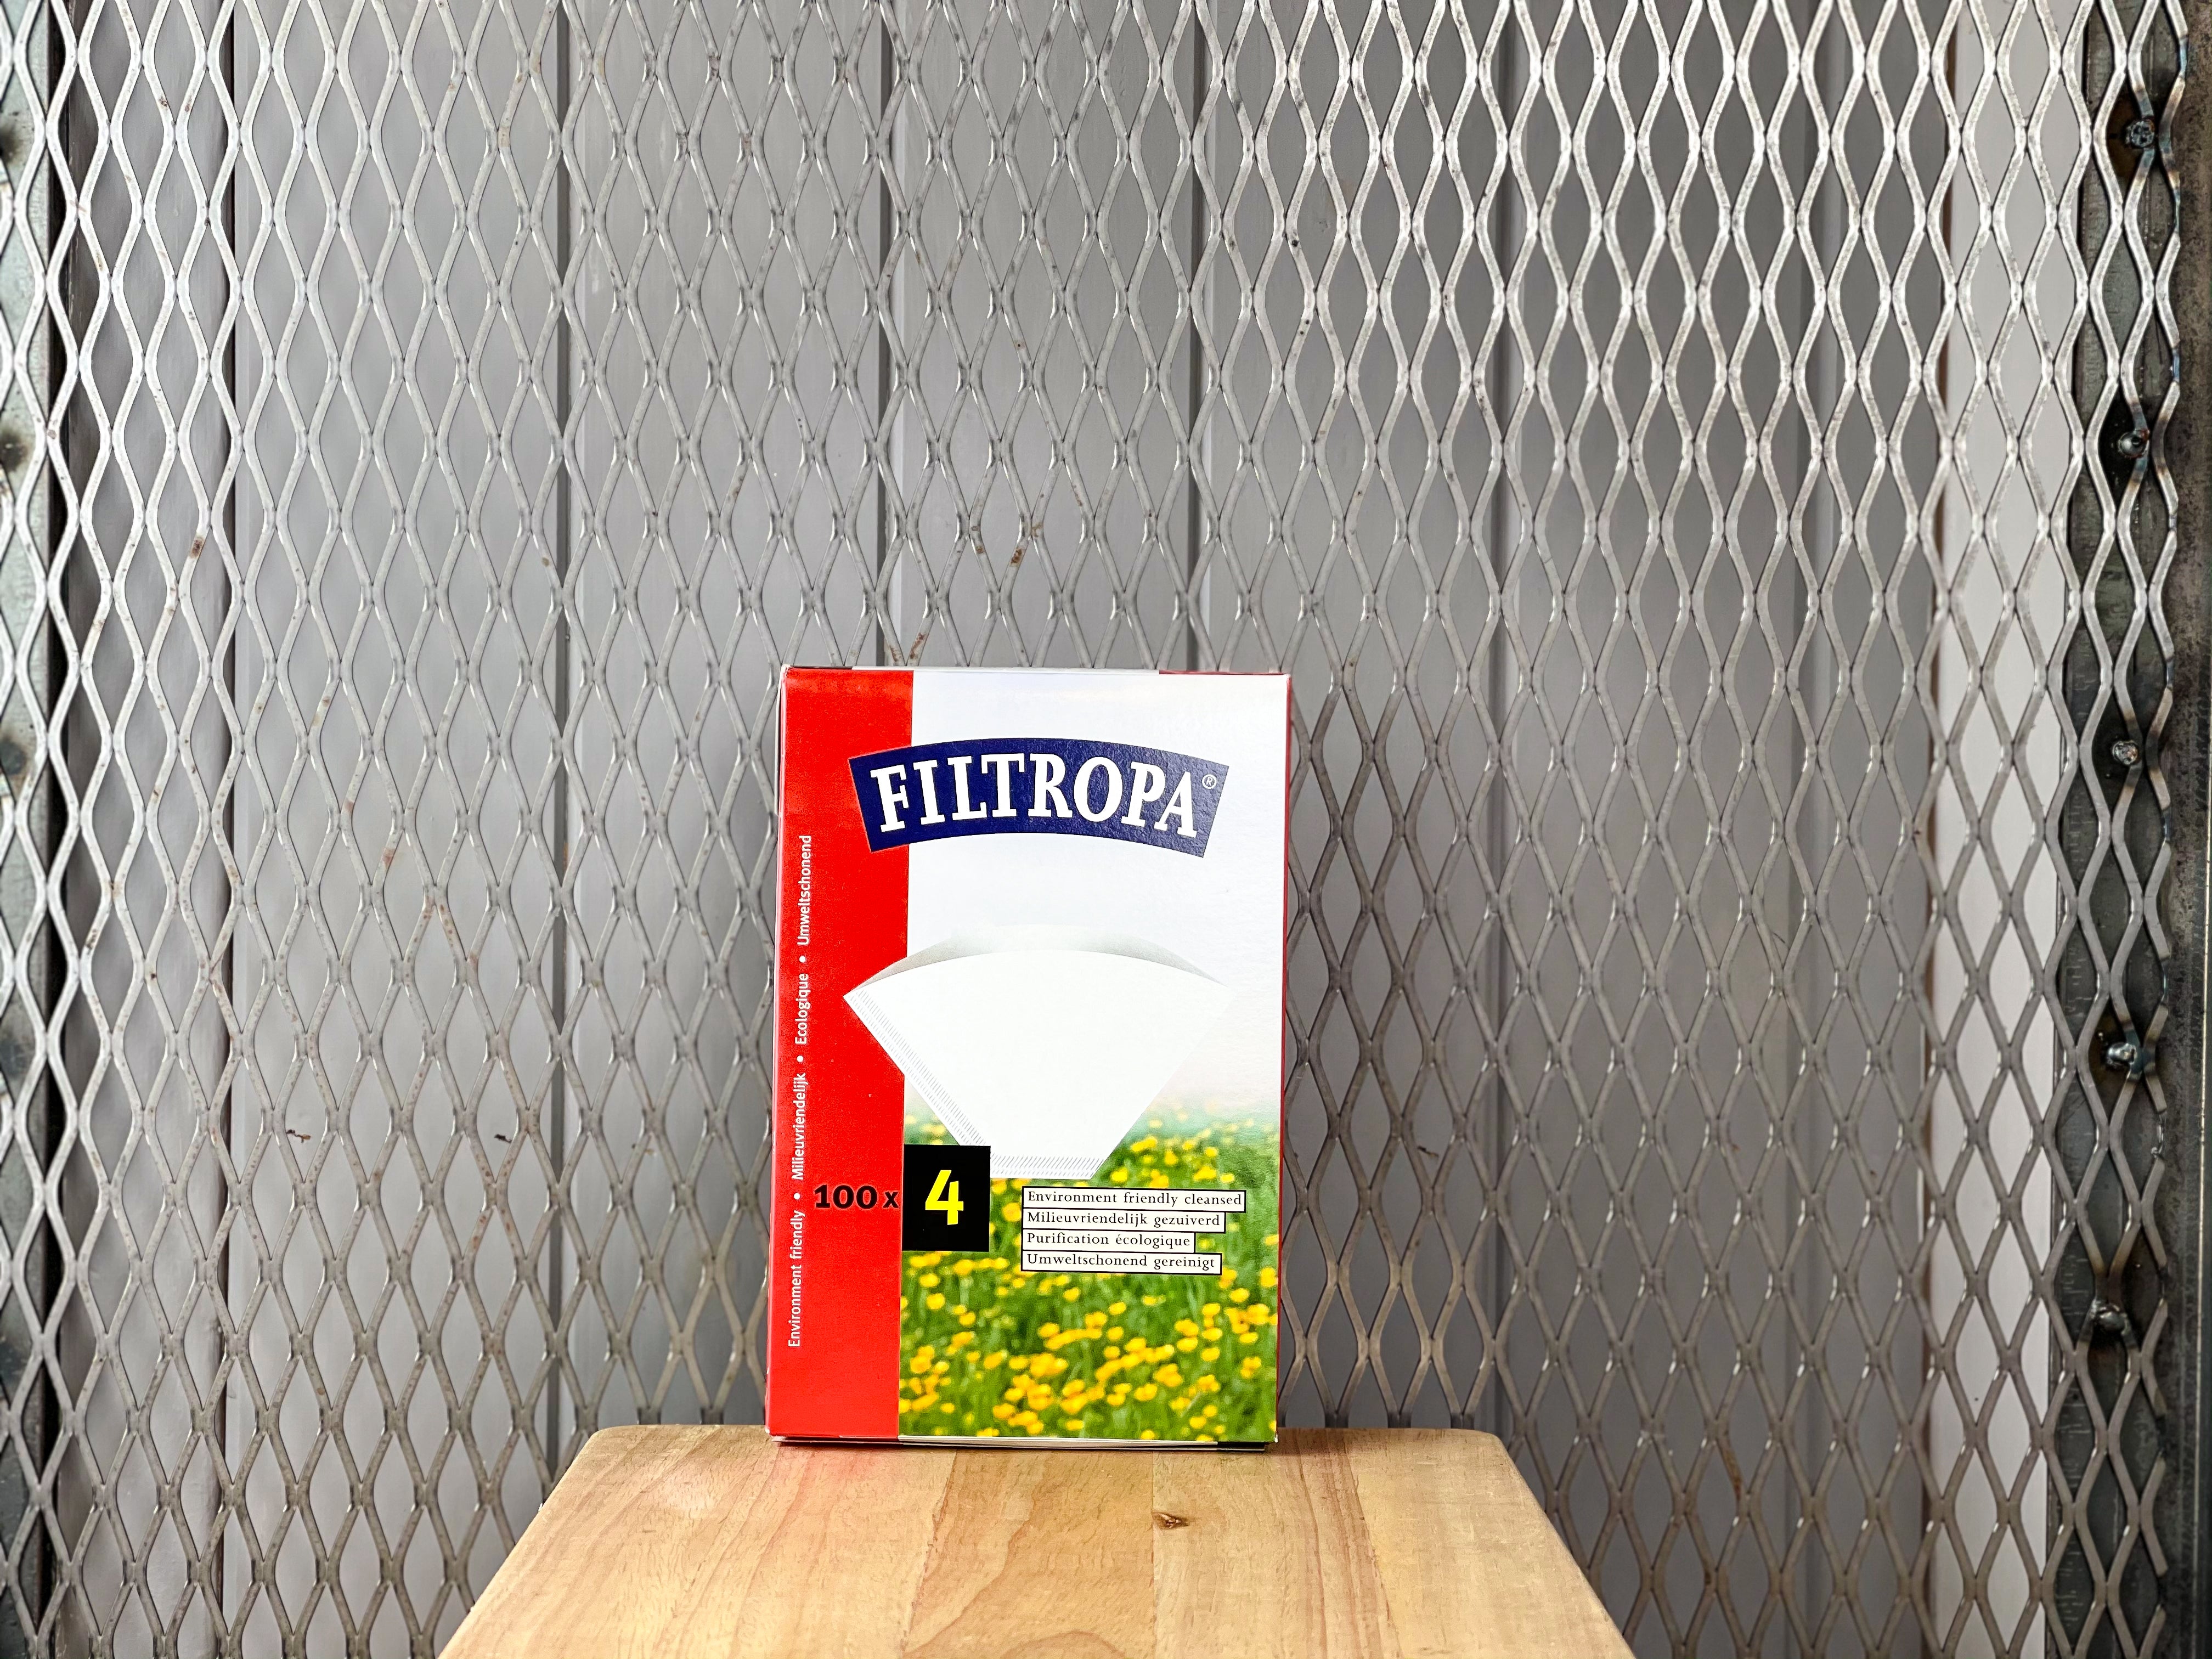 Filtropa Filter Papers (04) - White